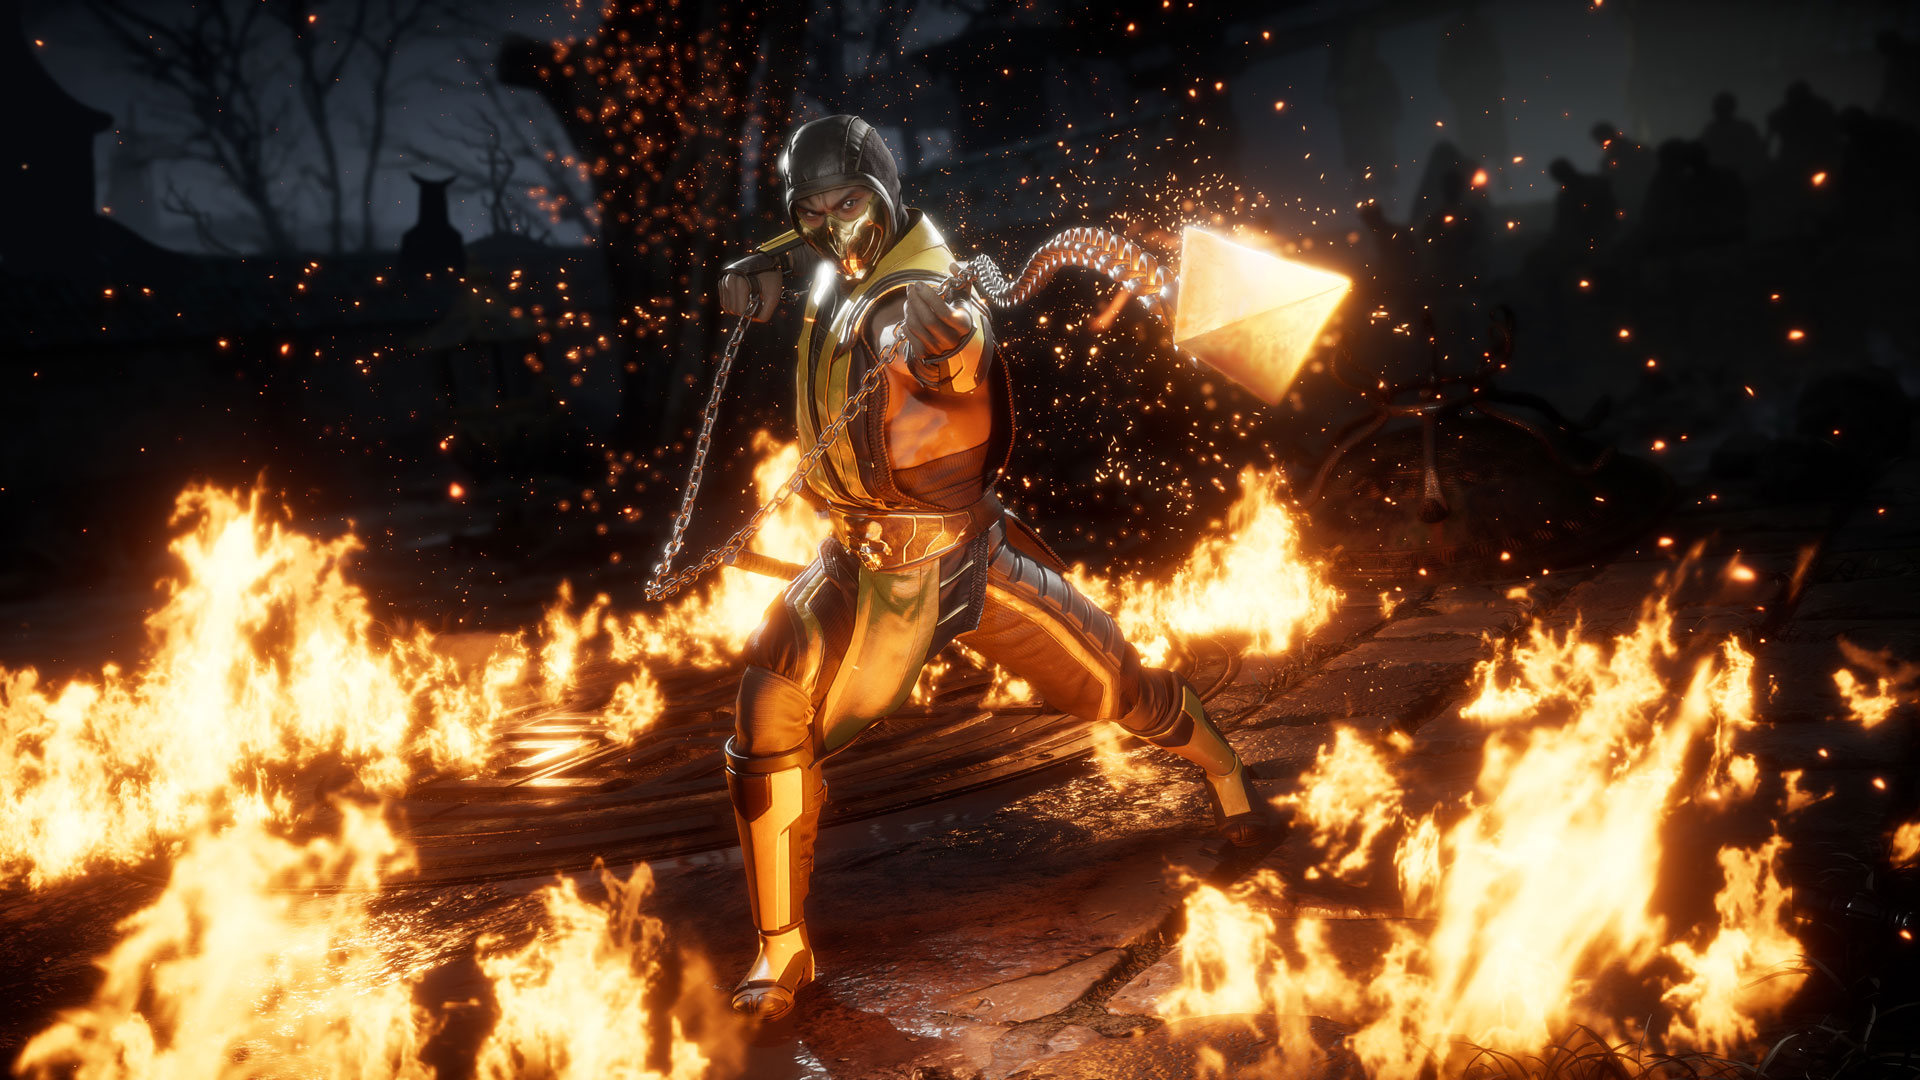 mortal kombat 11, scorpion (mortal kombat), mortal kombat, video game